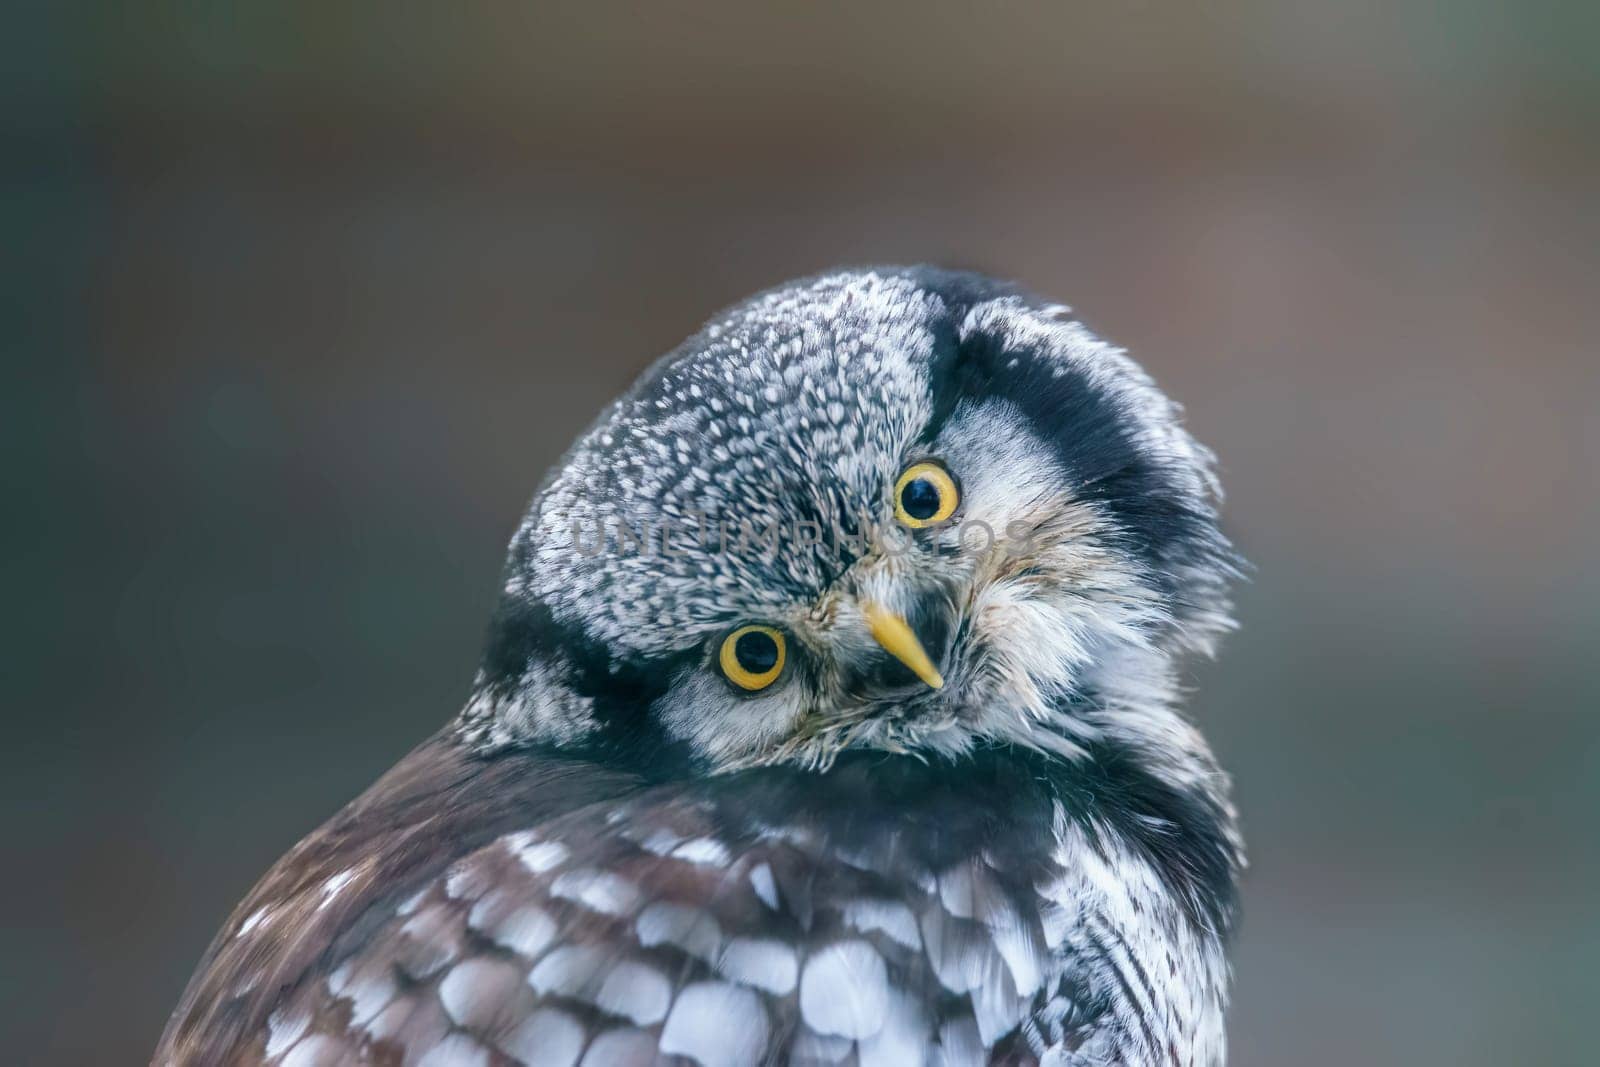 a hawk owl keeps an eye out for prey in a forest